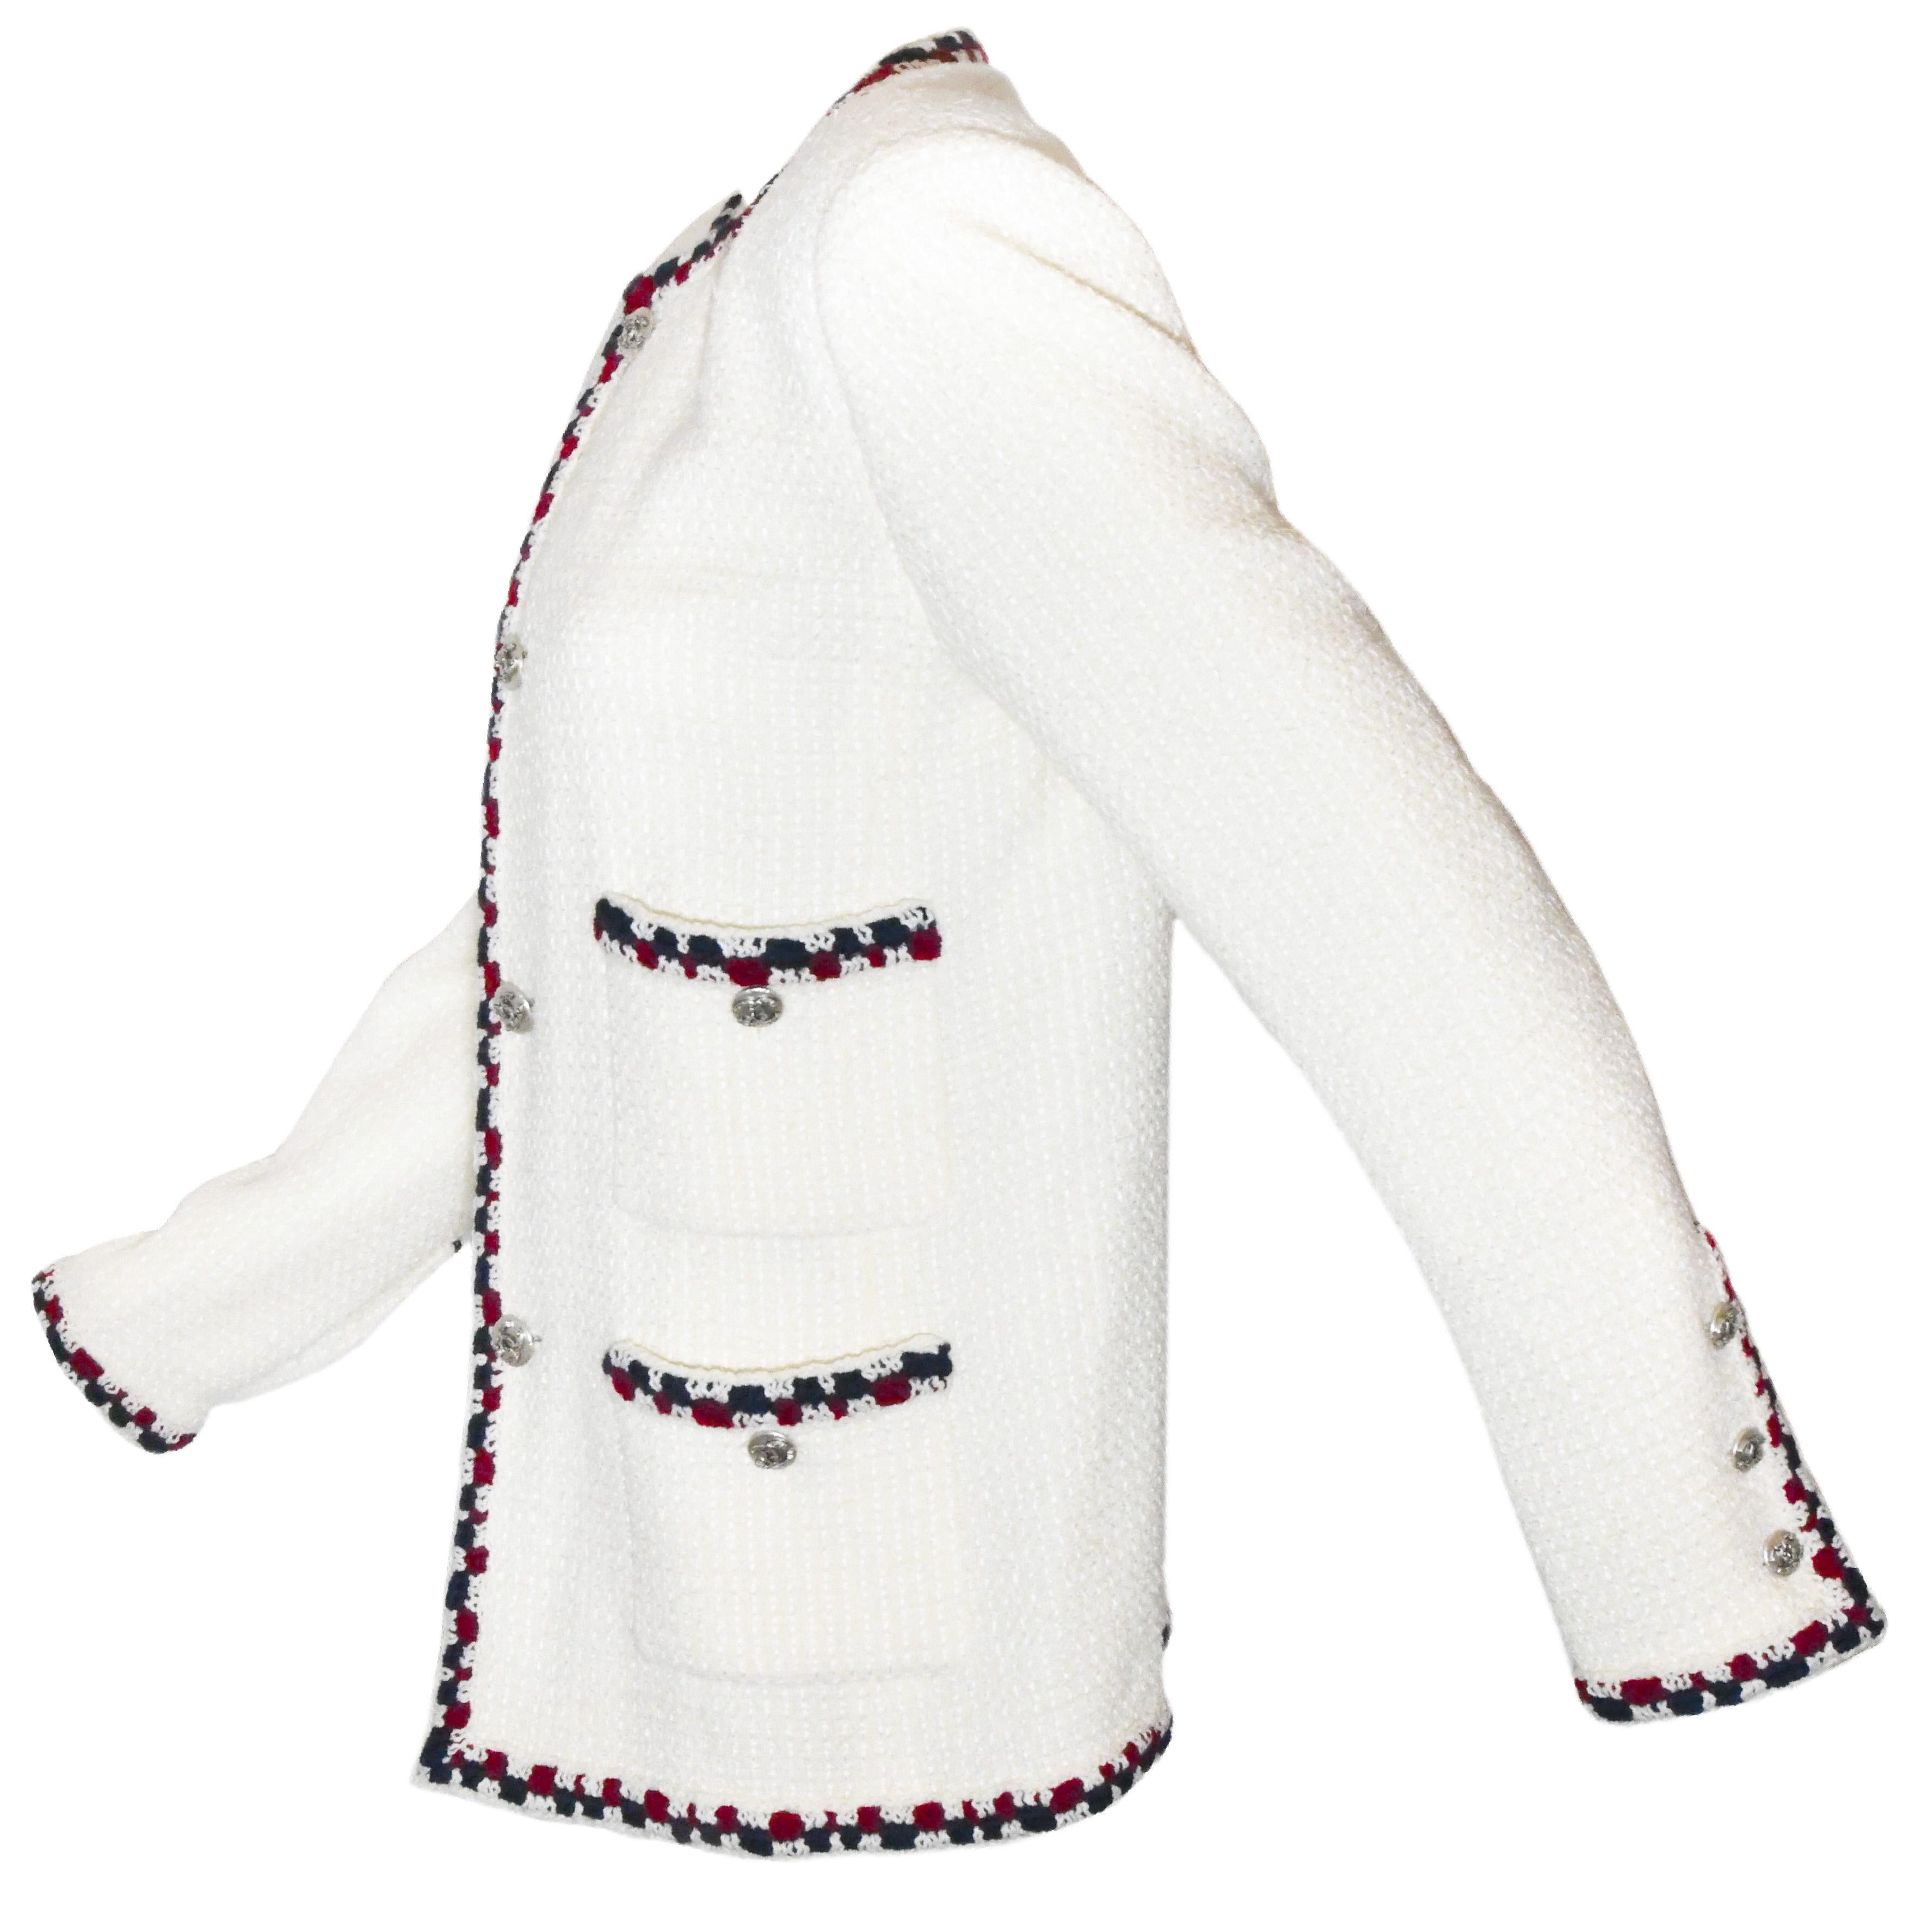 Chanel jacket features signature trim that has been crocheted with blue and red yarn on the 4 front patch pockets, the neckline, front and hem of jacket.  Crafted from exquisite ivory tweed with matching silk lining, jacket has classic Chanel